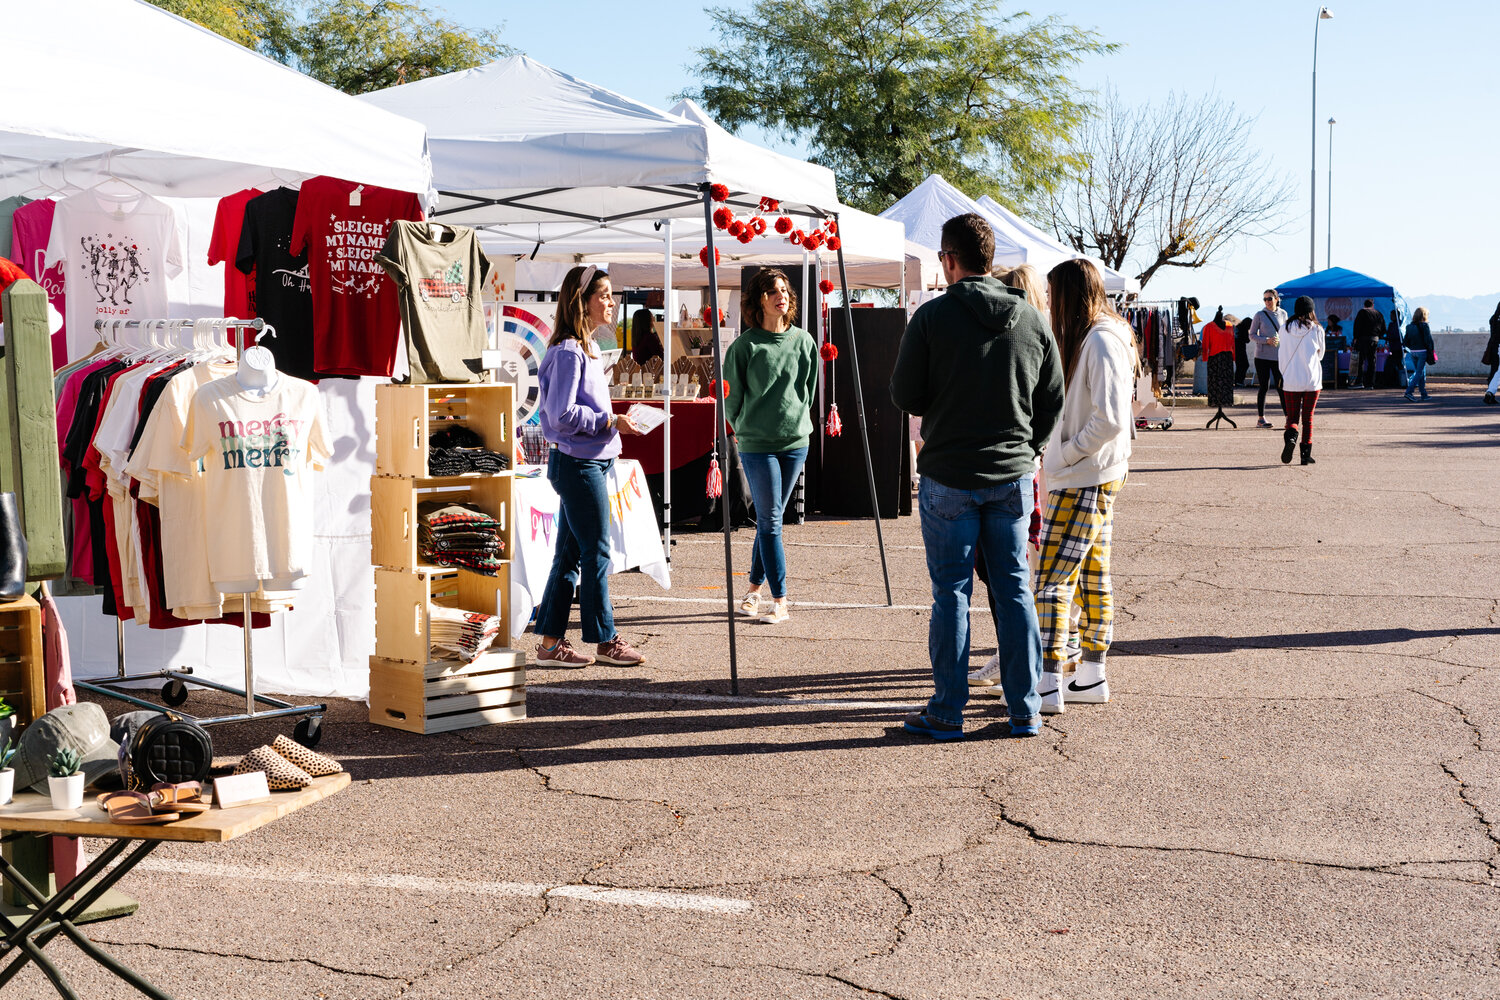 The Merry Merchantile Market hosts more than 80 local vendors as well as interactive experiences and workshops.